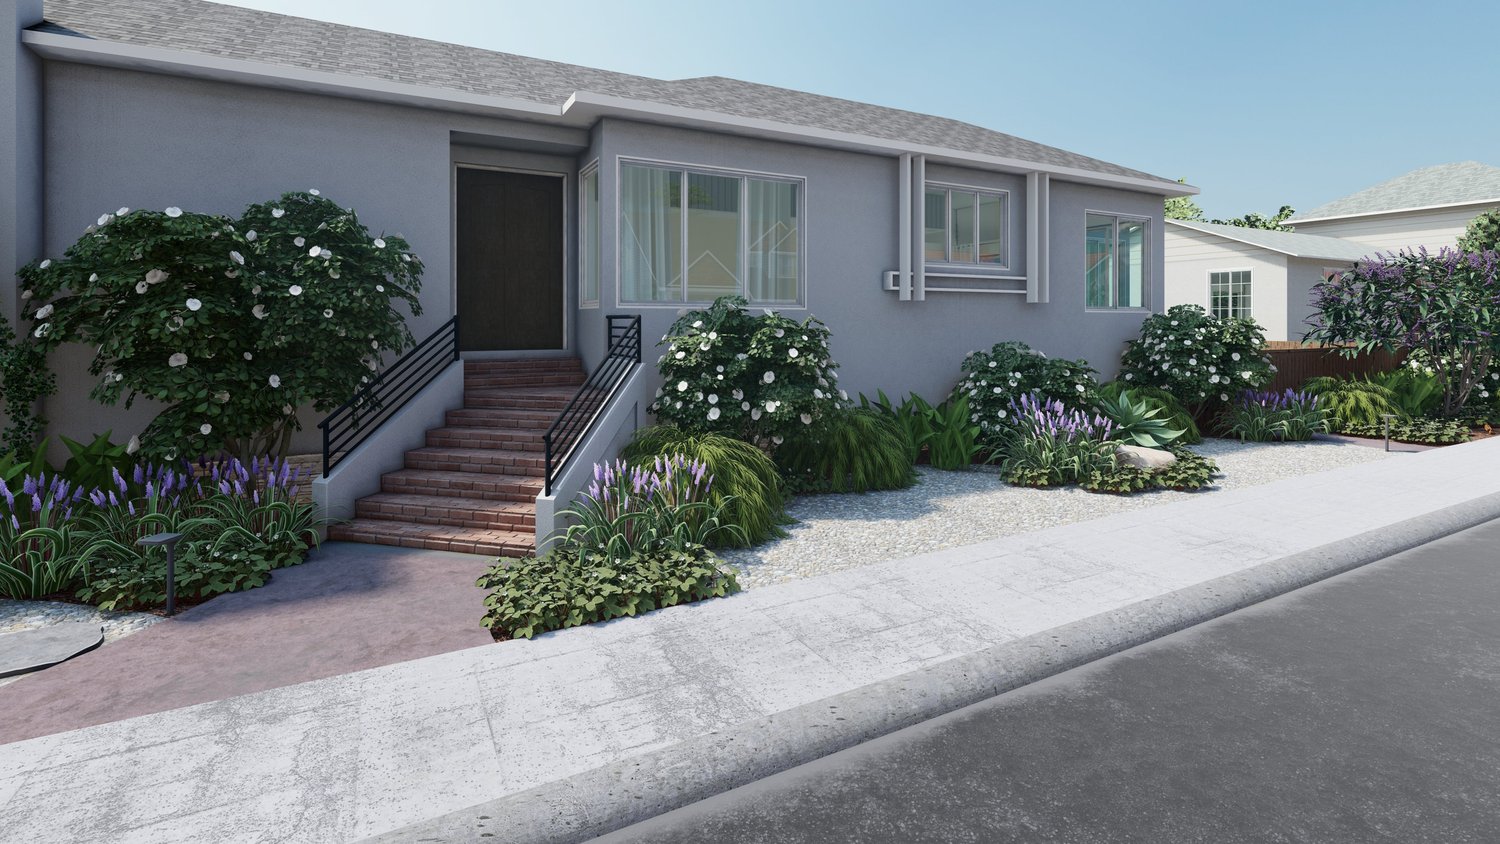 San Francisco front yard design with plantings and concrete path